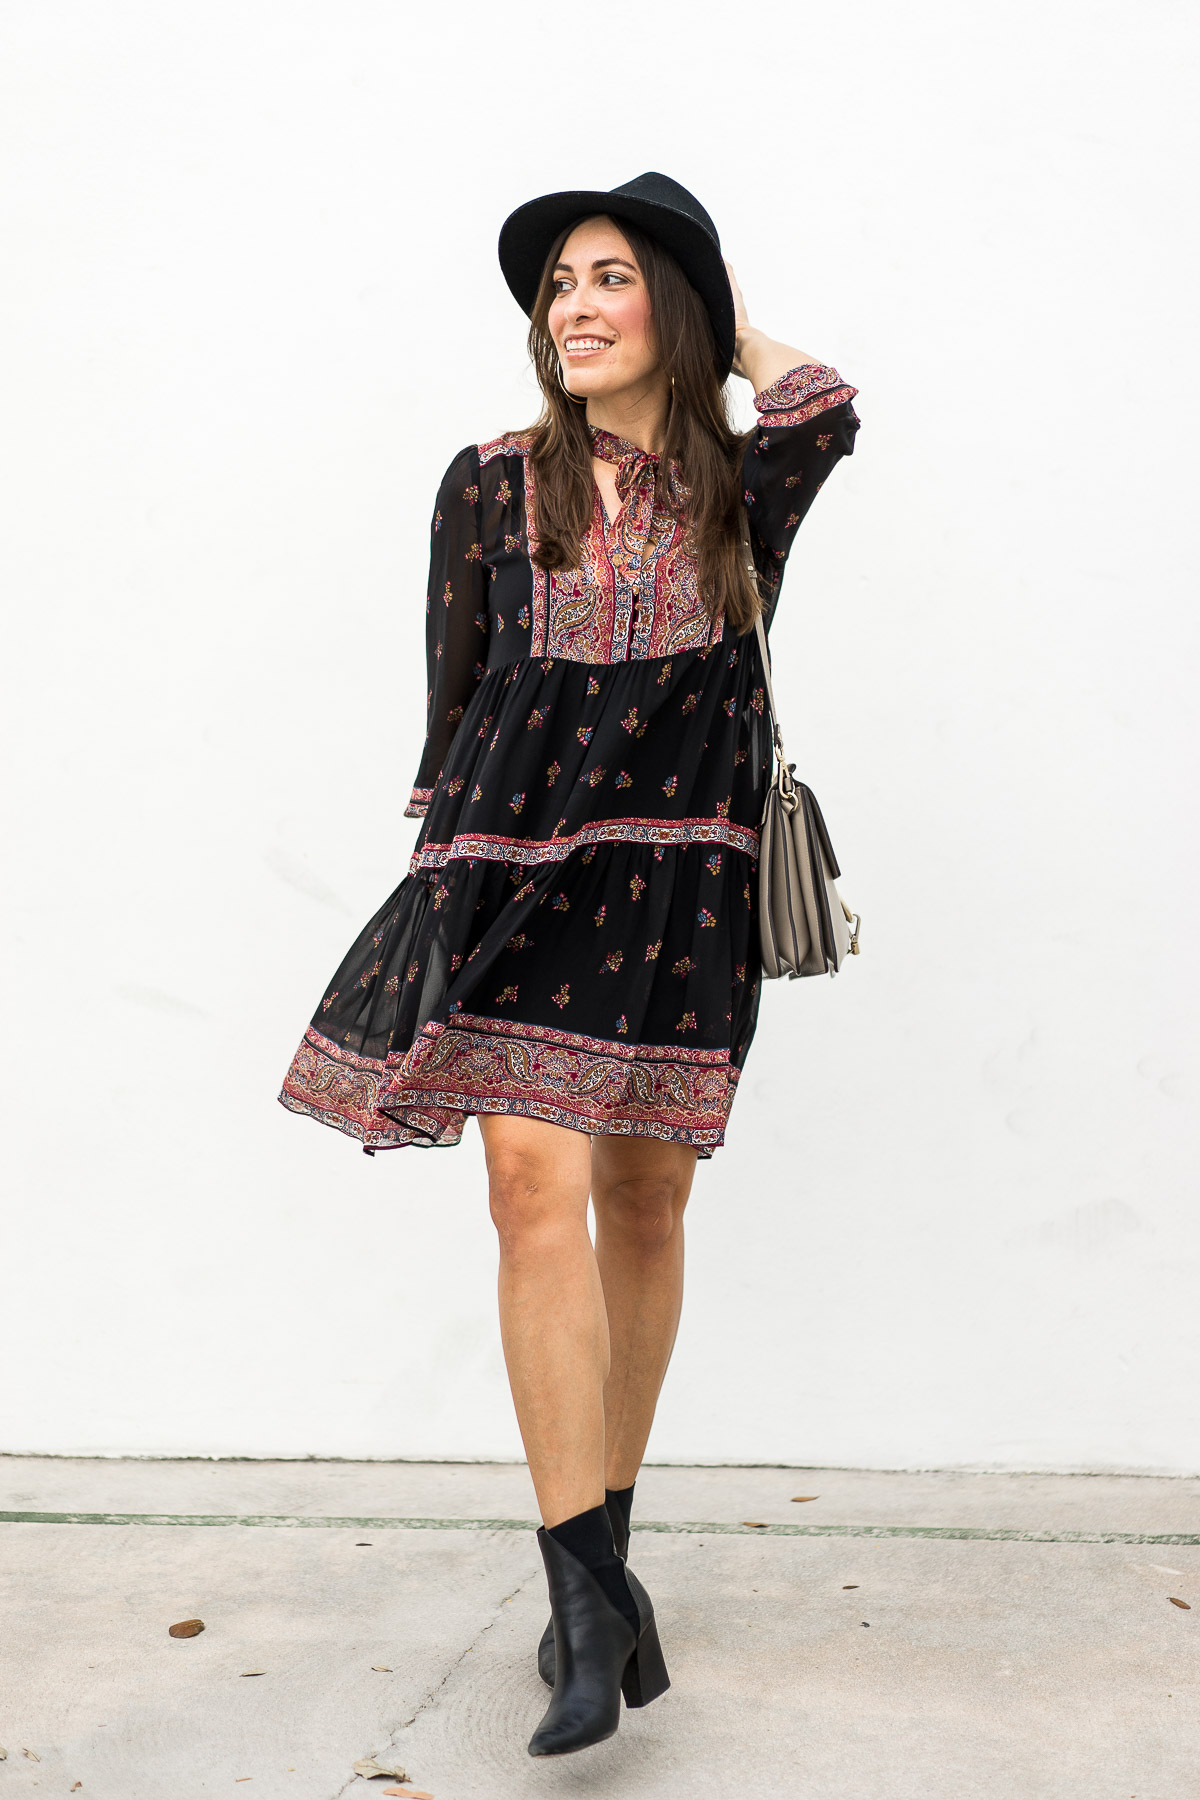 A Glam Lifestyle blogger Amanda favors boho midi dresses like the Joie Alpina dress and accessorizes with black ankle booties and Rag and Bone fedora